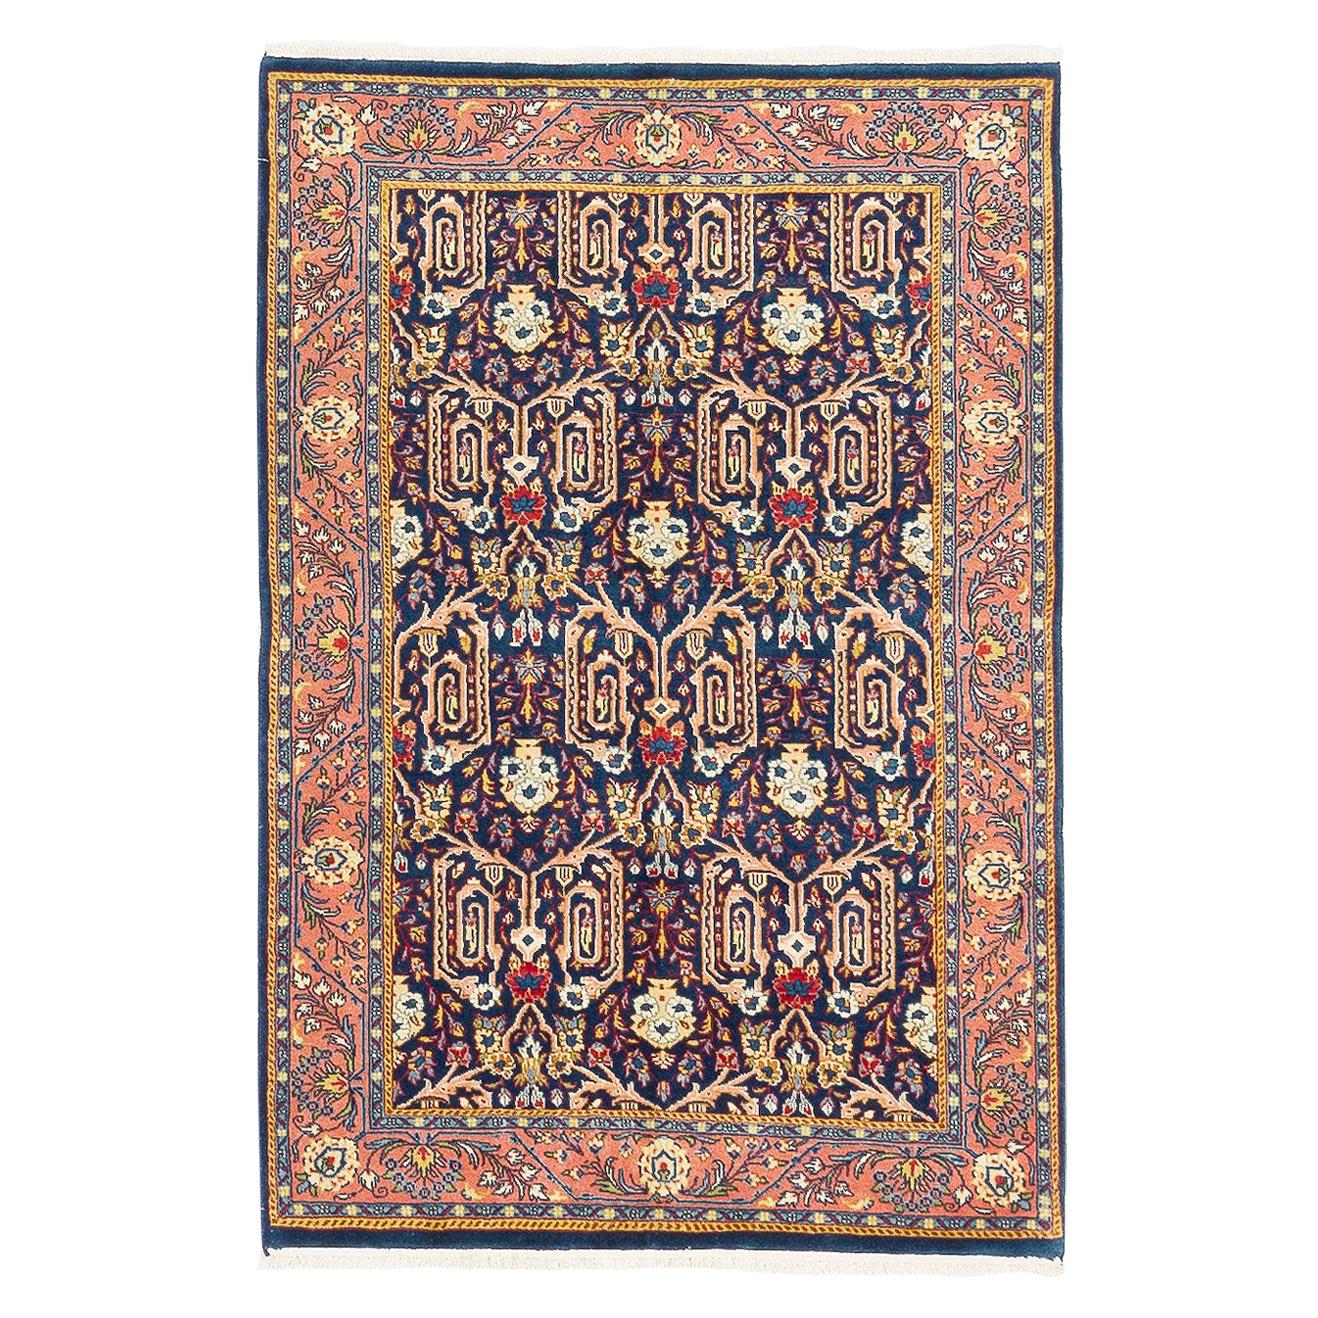 Vintage Persian Sarouk Rug with Colored Botanical Details on Navy Blue Field